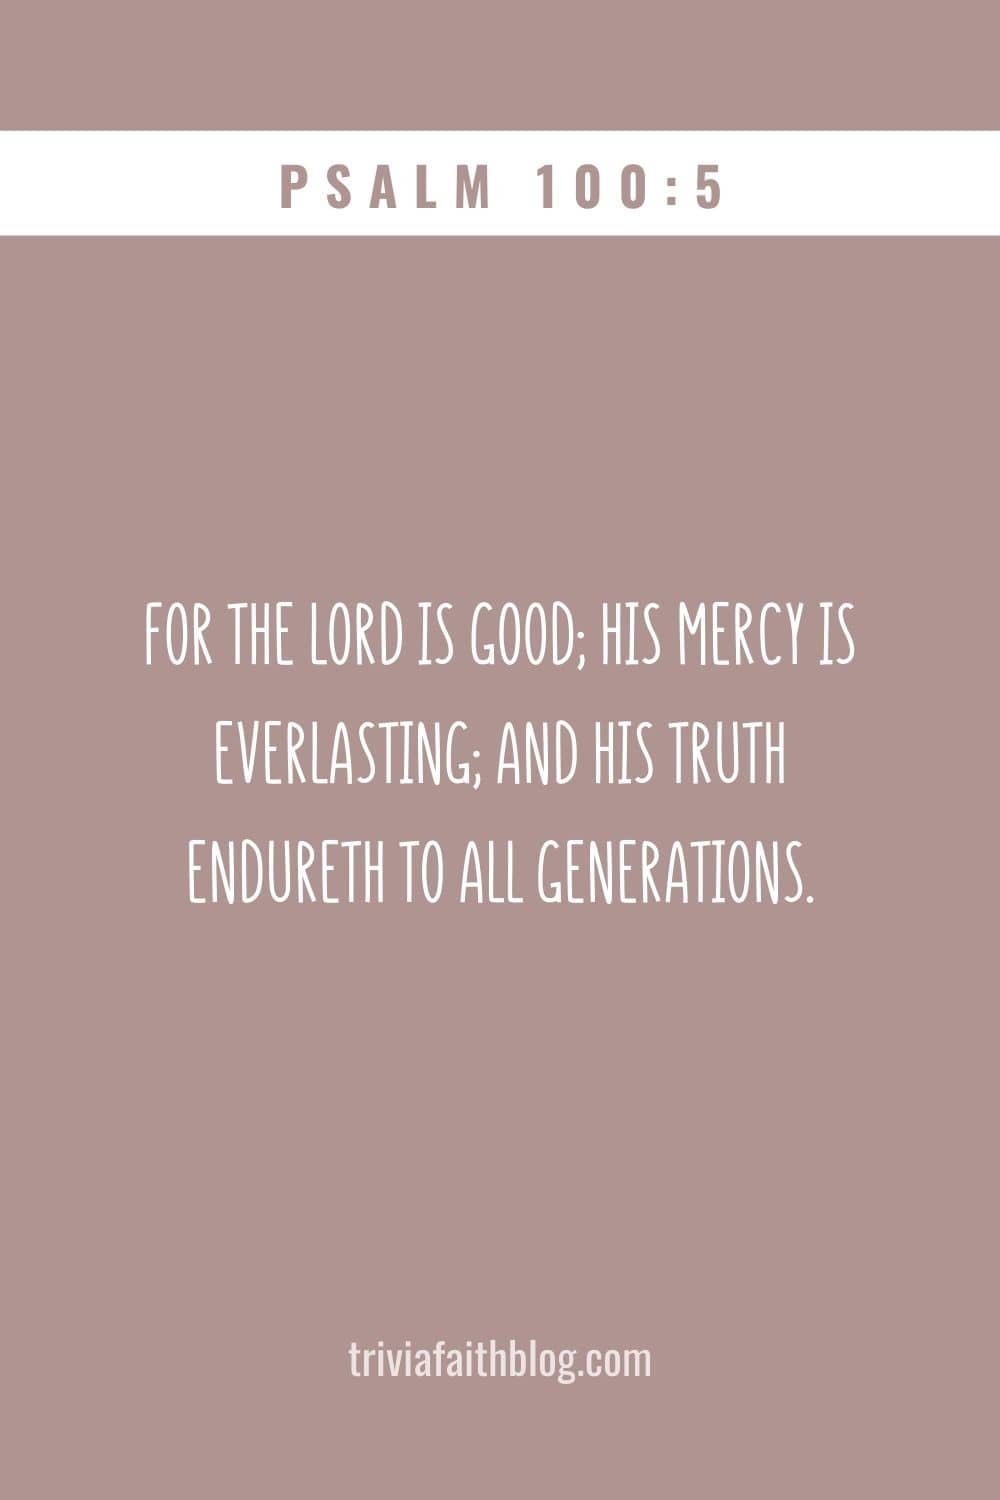 For the LORD is good; his mercy is everlasting; and his truth endureth to all generations